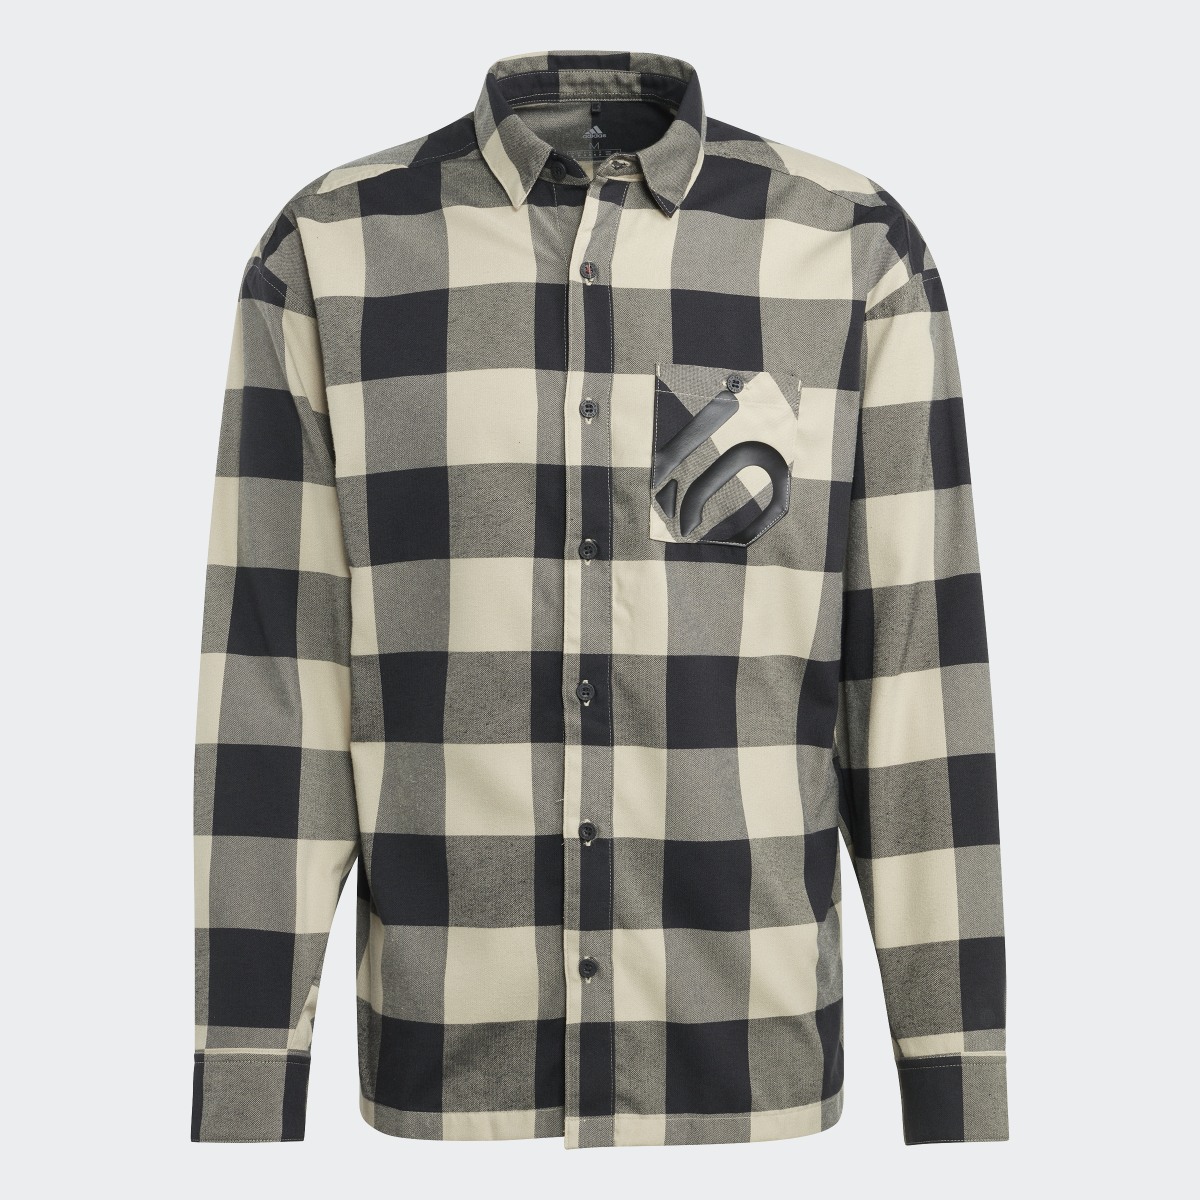 Adidas Five Ten Brand of the Brave Flannel Shirt (uniseks). 4